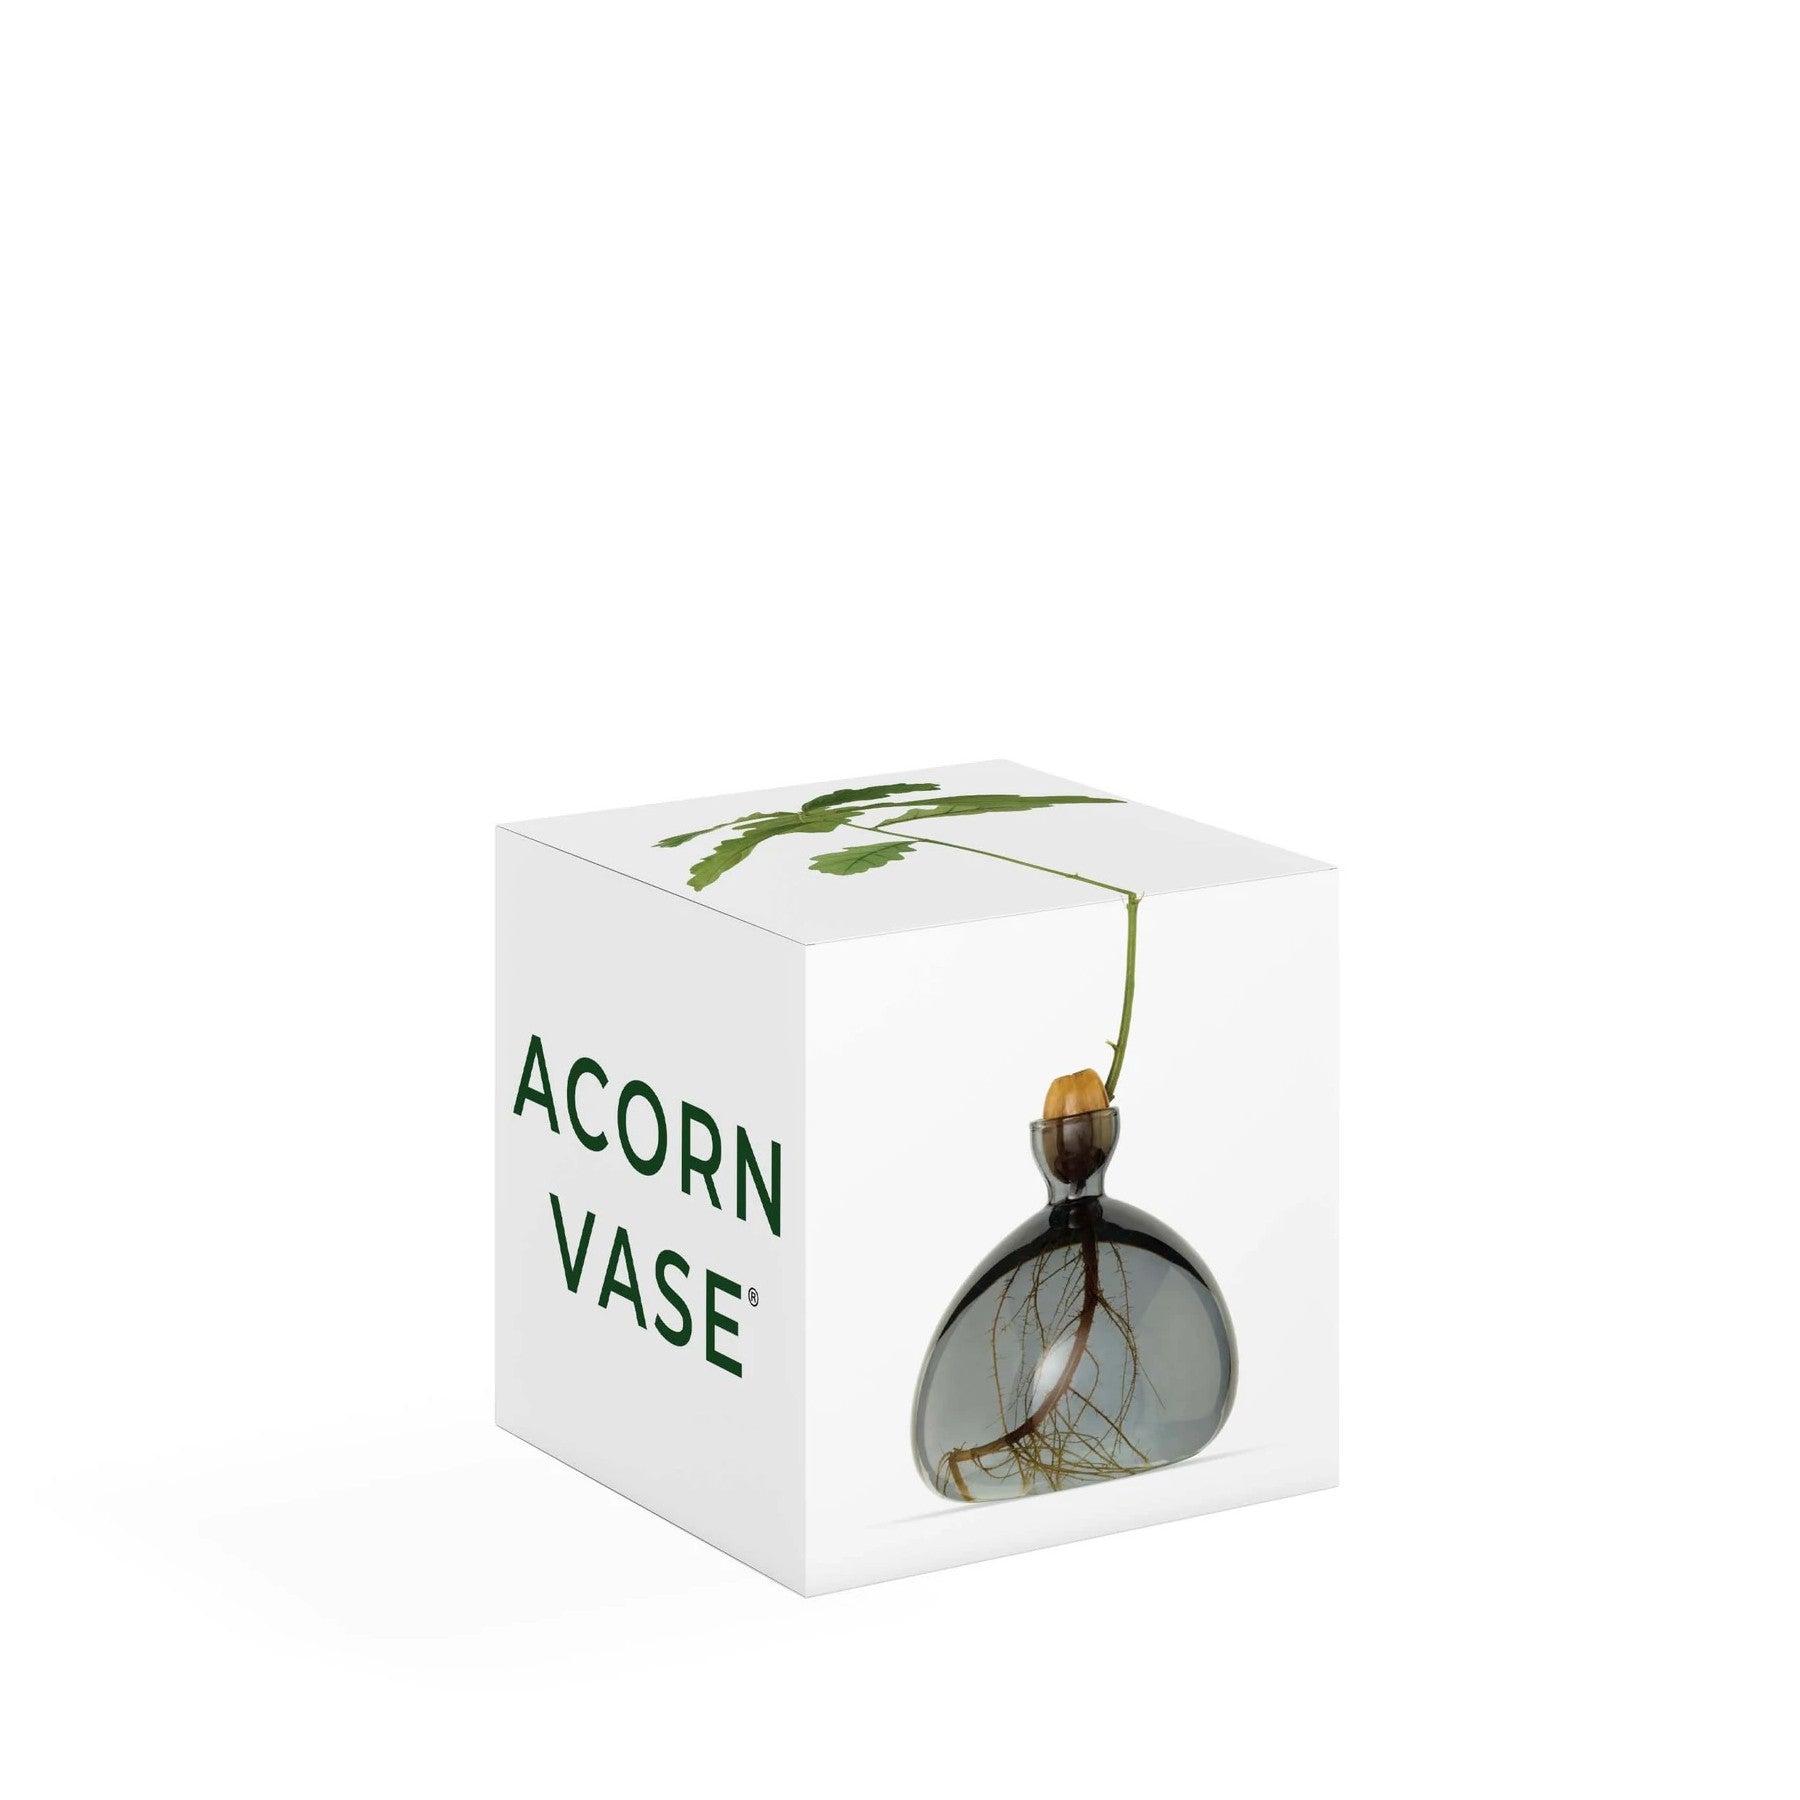 Acorn vase on white background with single green oak sprout growing from acorn inside clear glass vase, innovative plant growth concept, minimalist design.